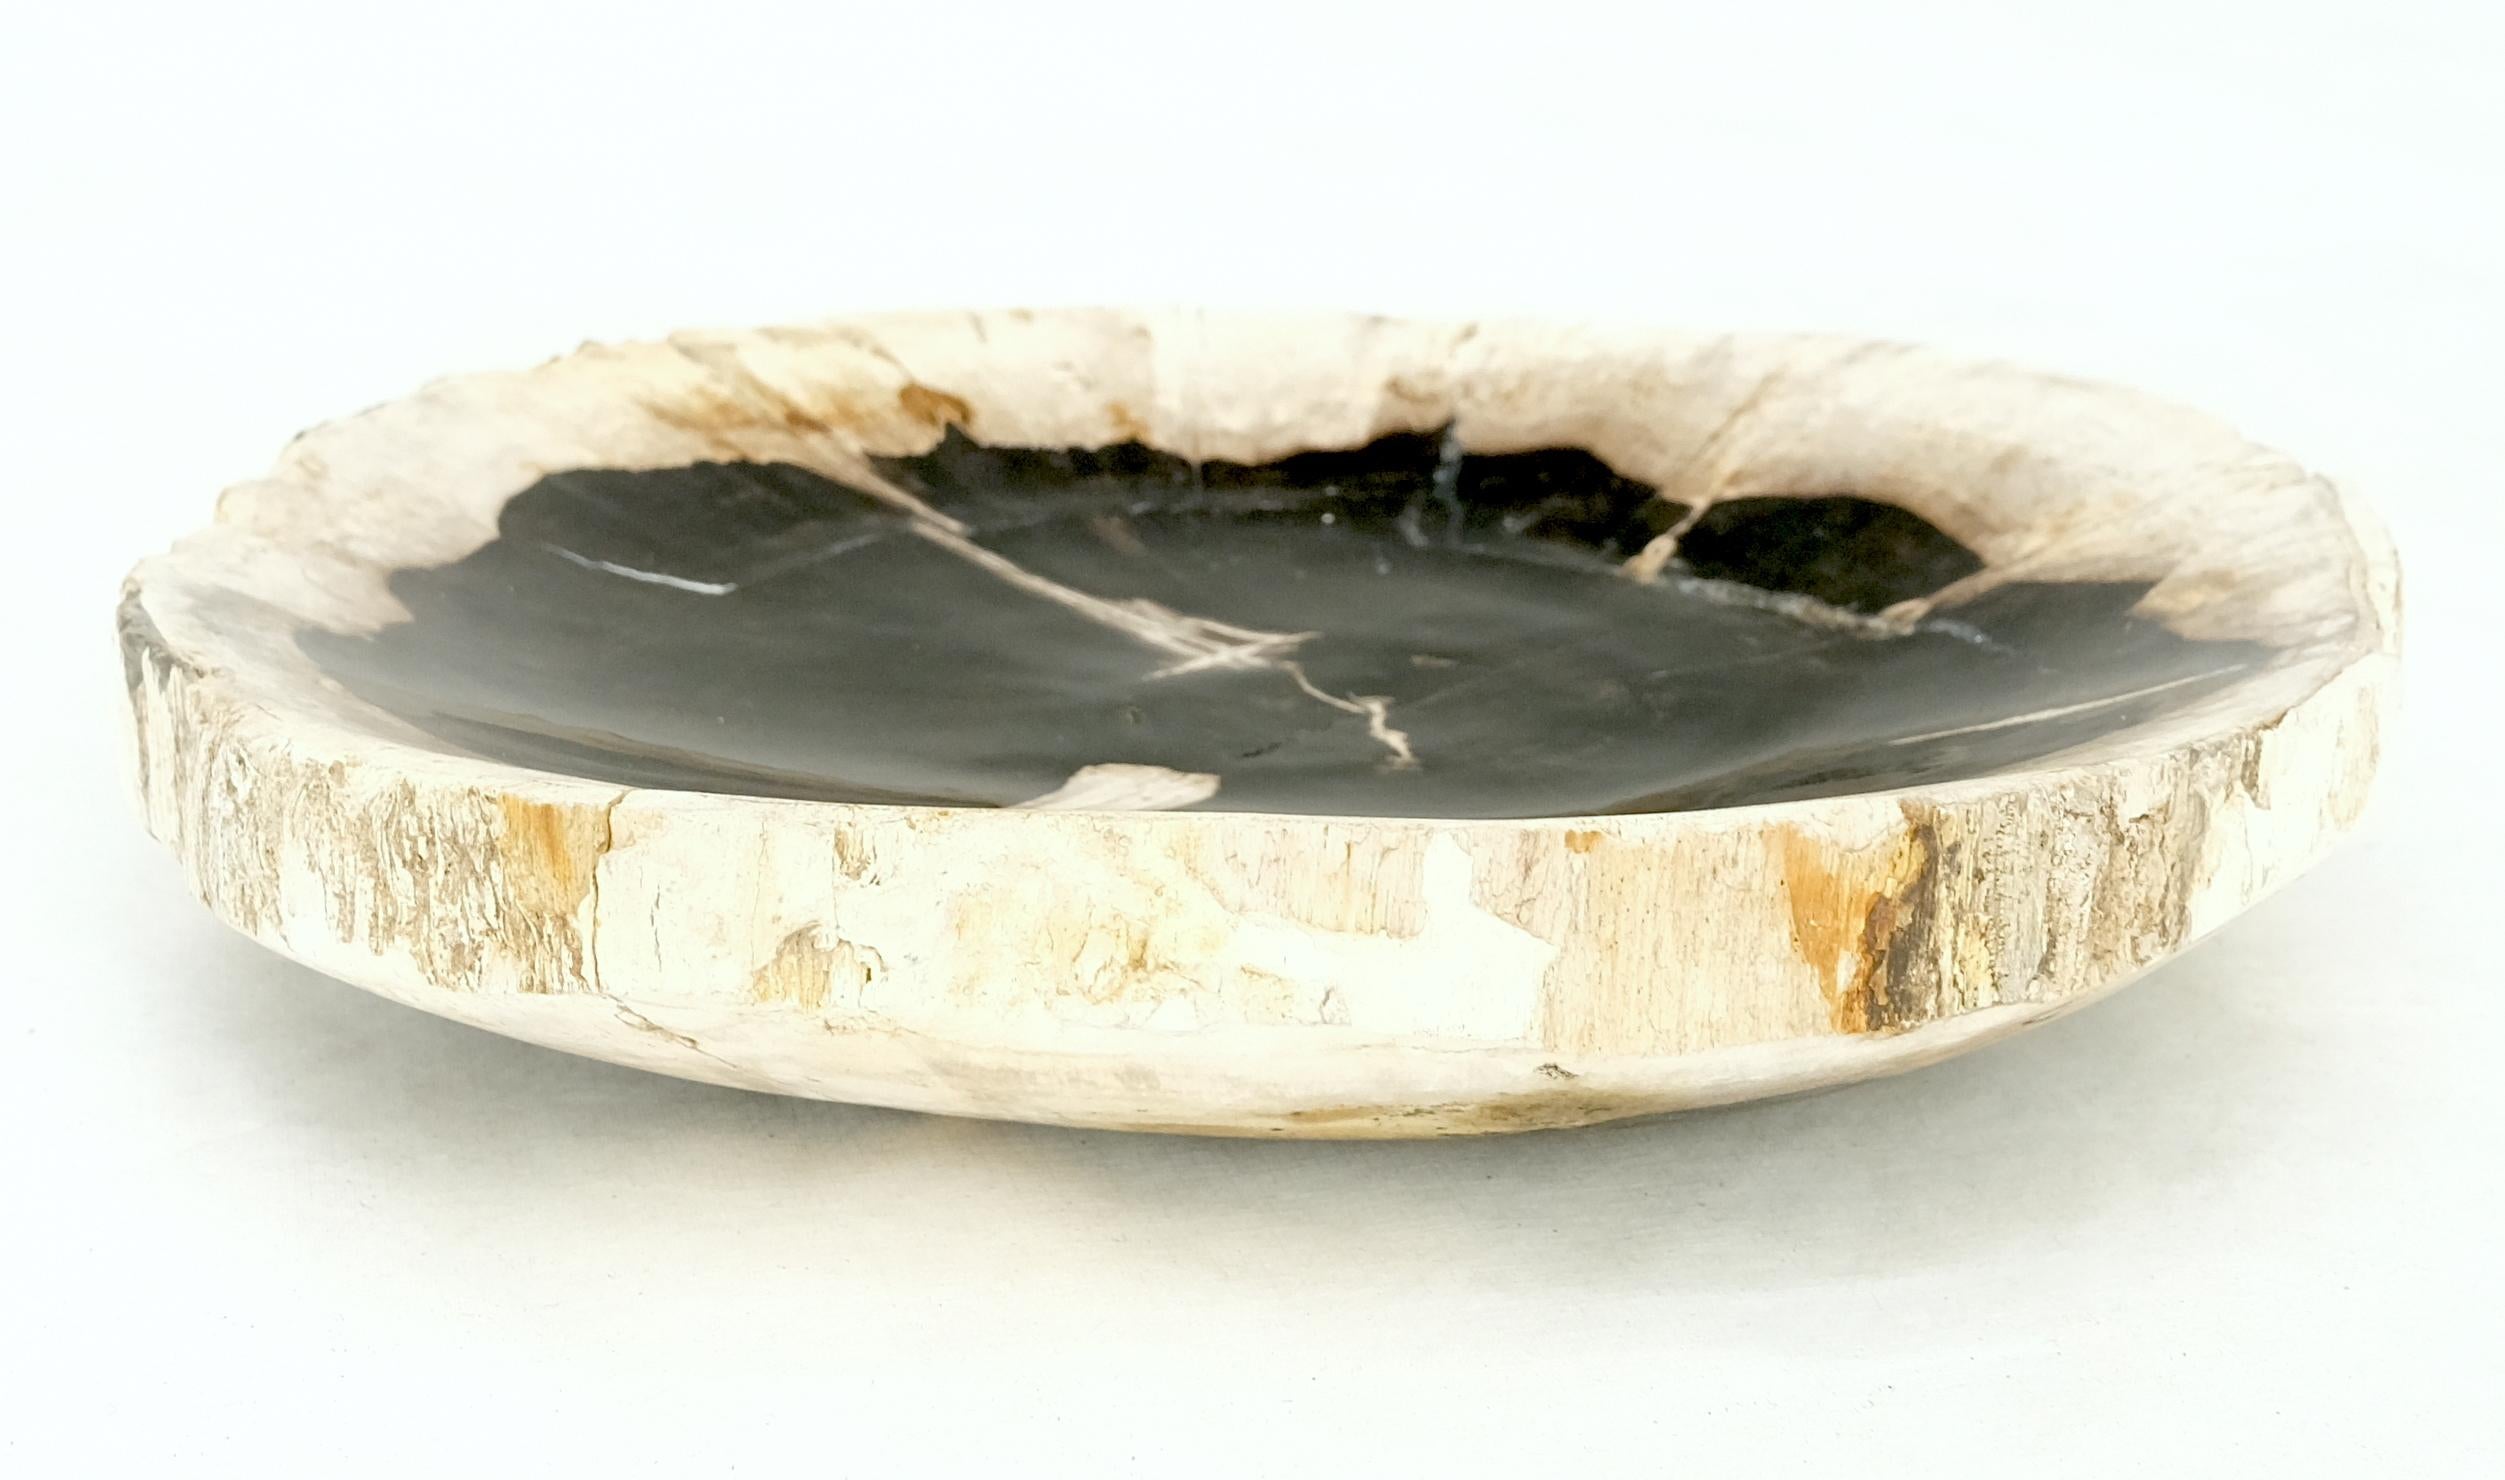 Petrified Wood Round Black & Beige Bowl Dish Large Plate In Excellent Condition For Sale In Rockaway, NJ